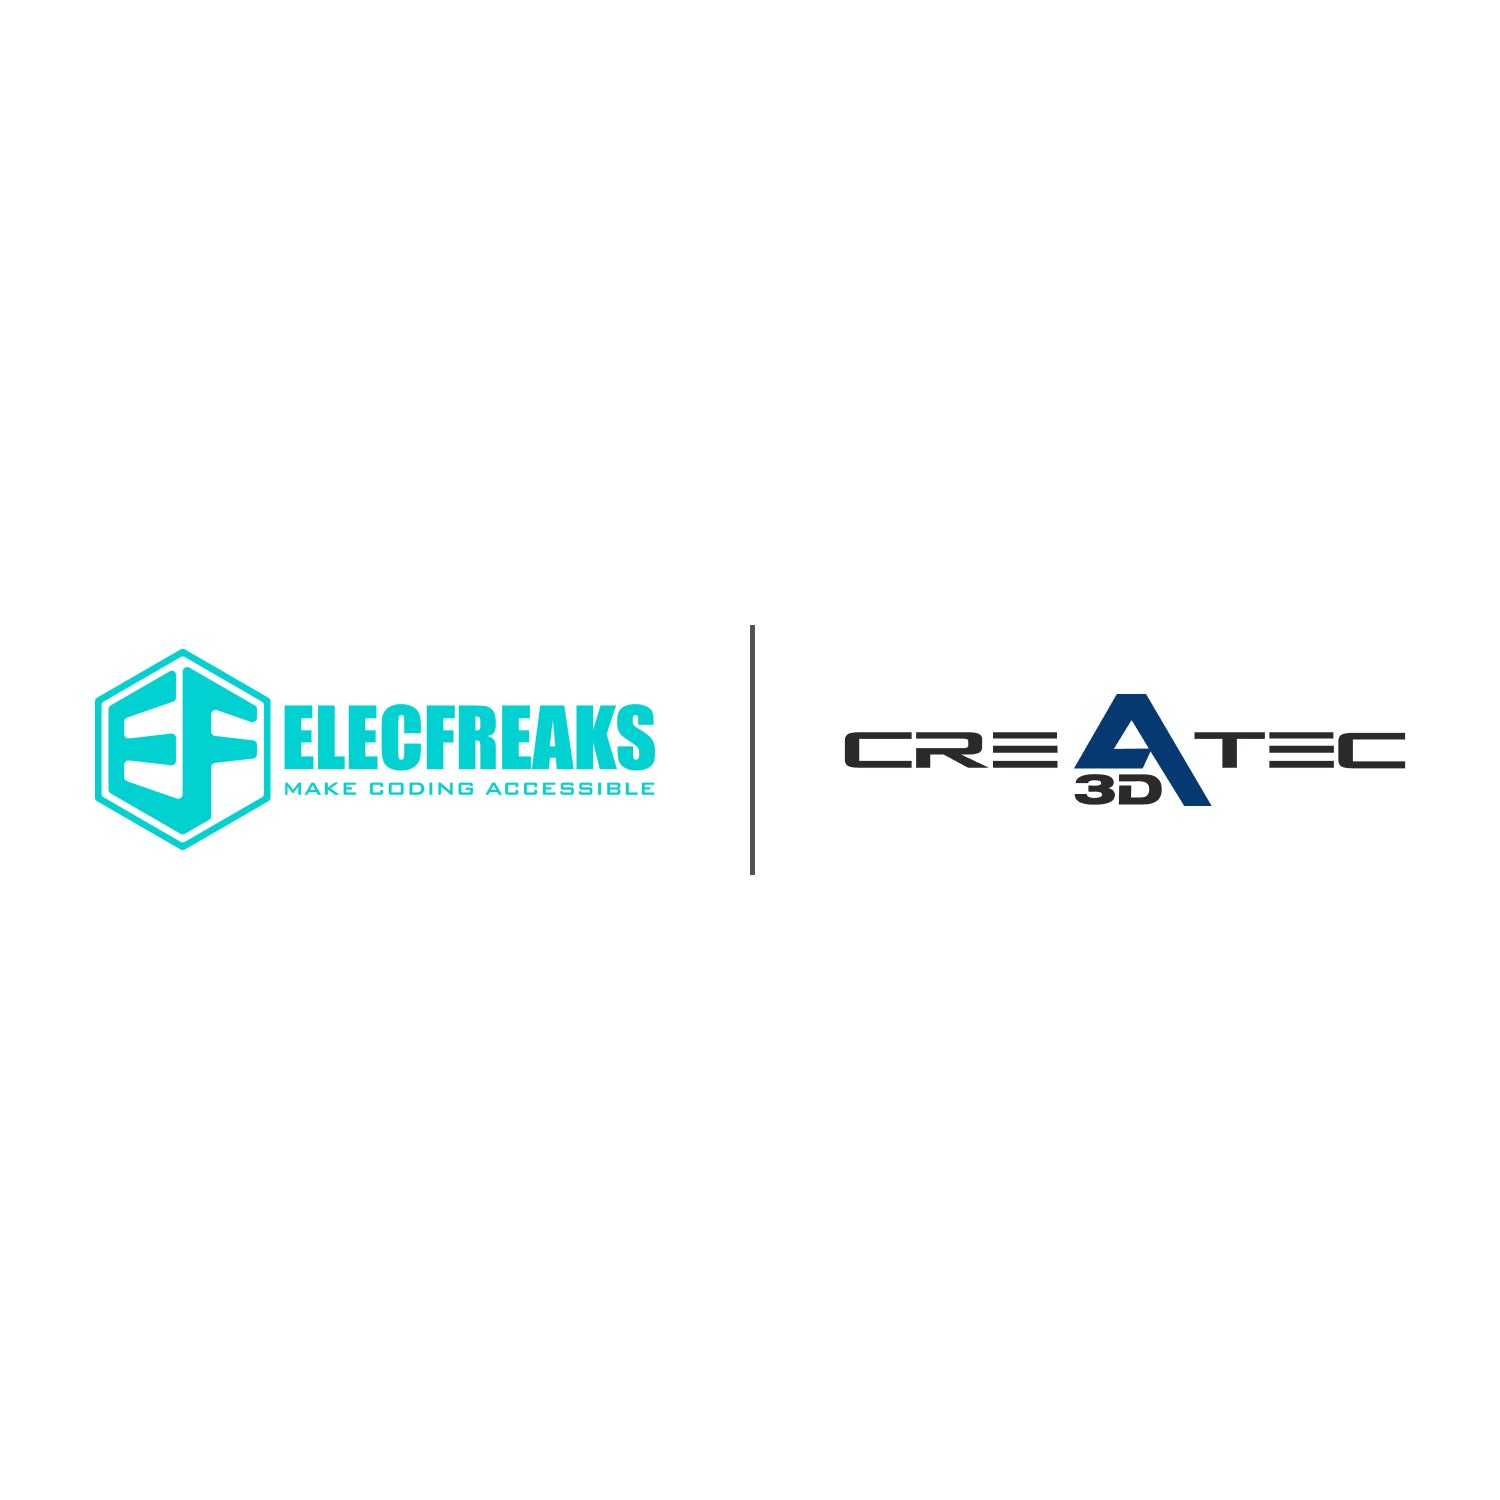 OUR NEW DISTRIBUTOR -- Createc 3D